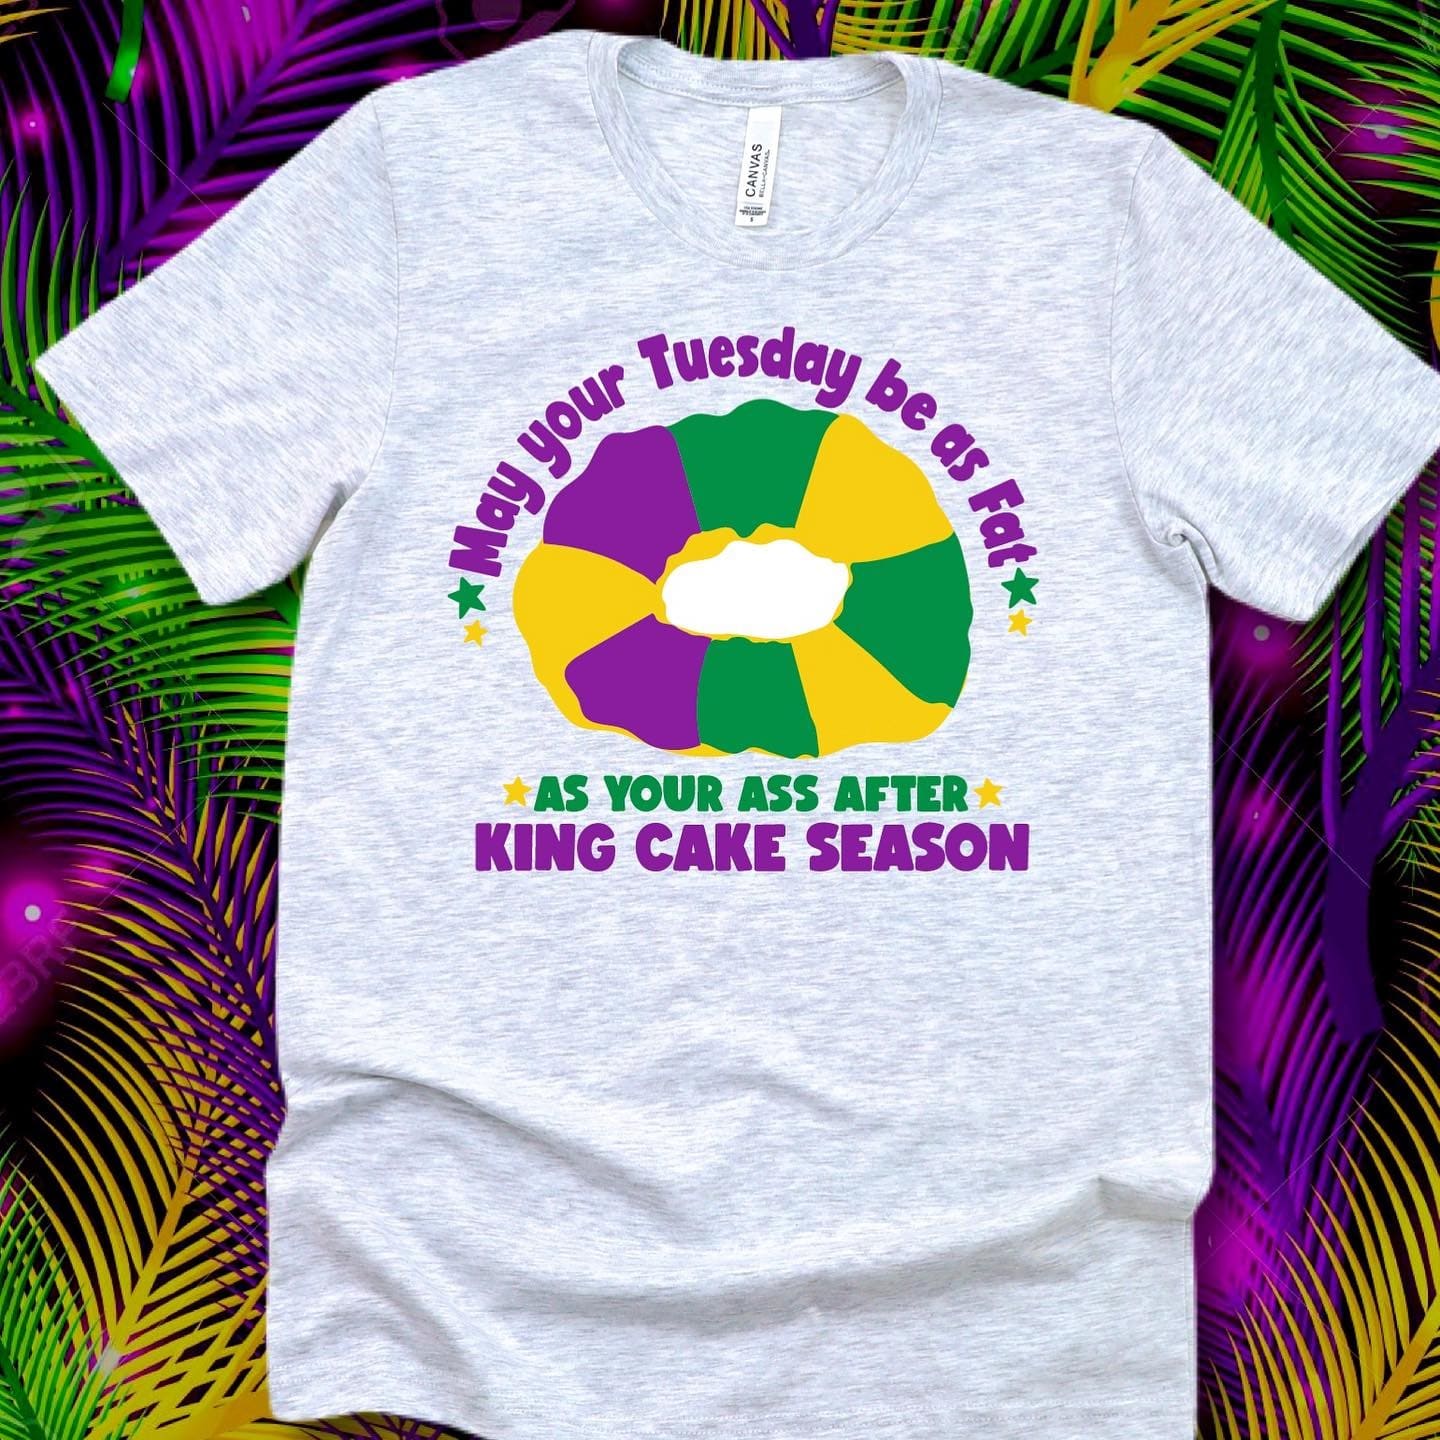 May your Tuesday be as fat as your ass after king cake season - Twelfth Night